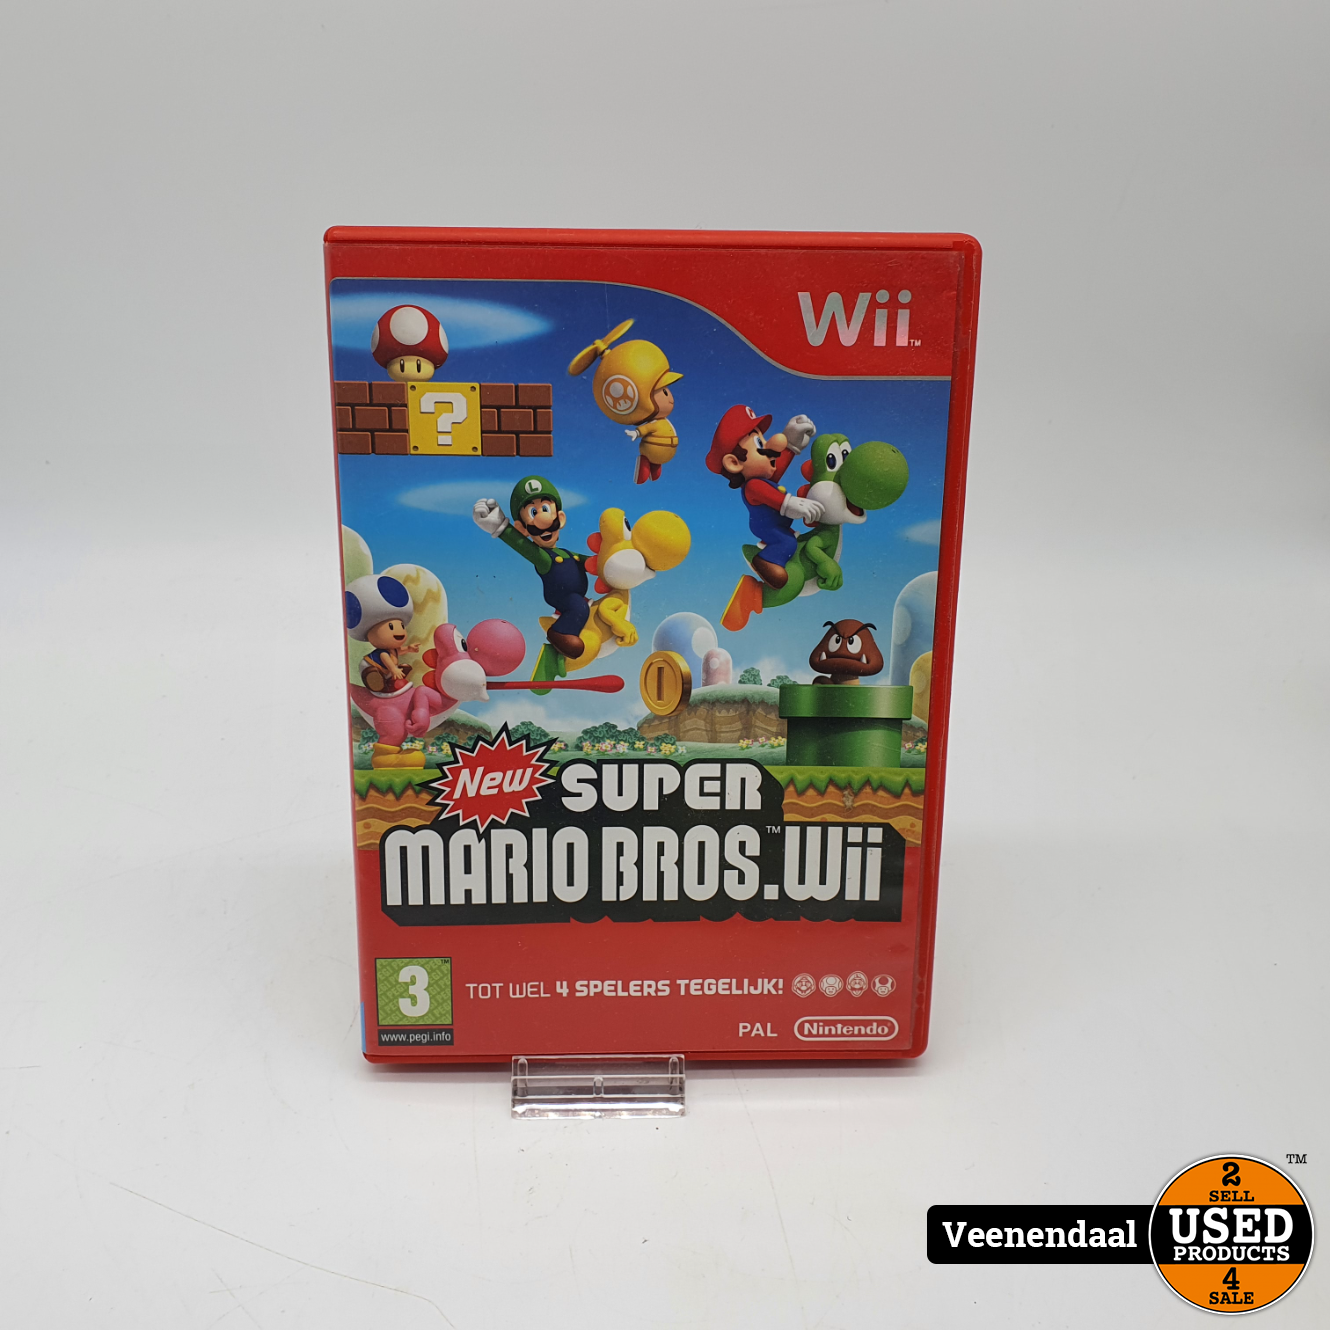 Wii Game: Mario Bros.Wii - Used Veenendaal